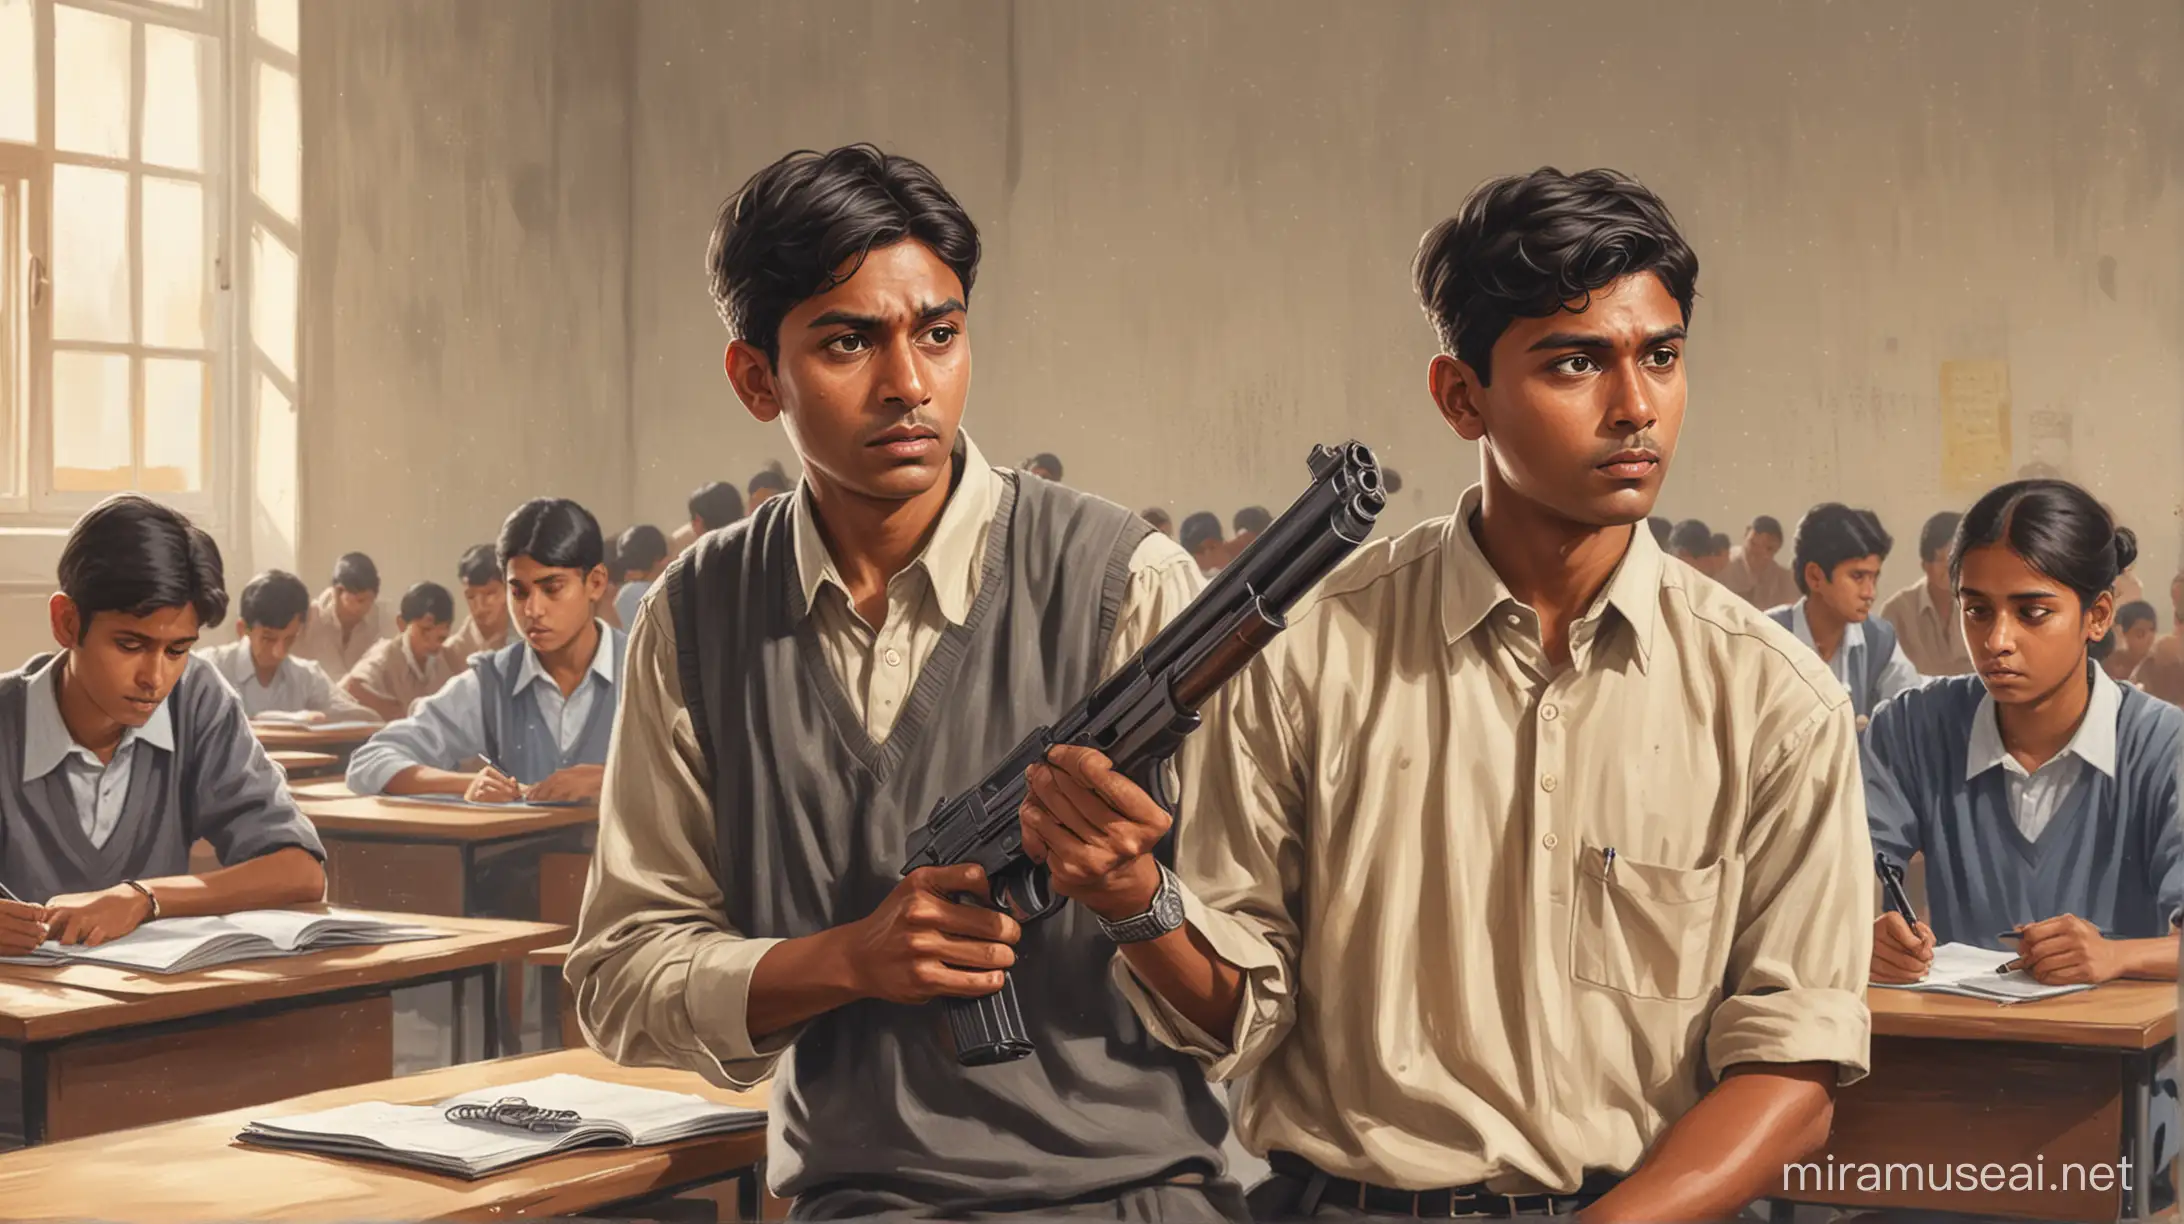 Indian School Scene with Armed Criminal